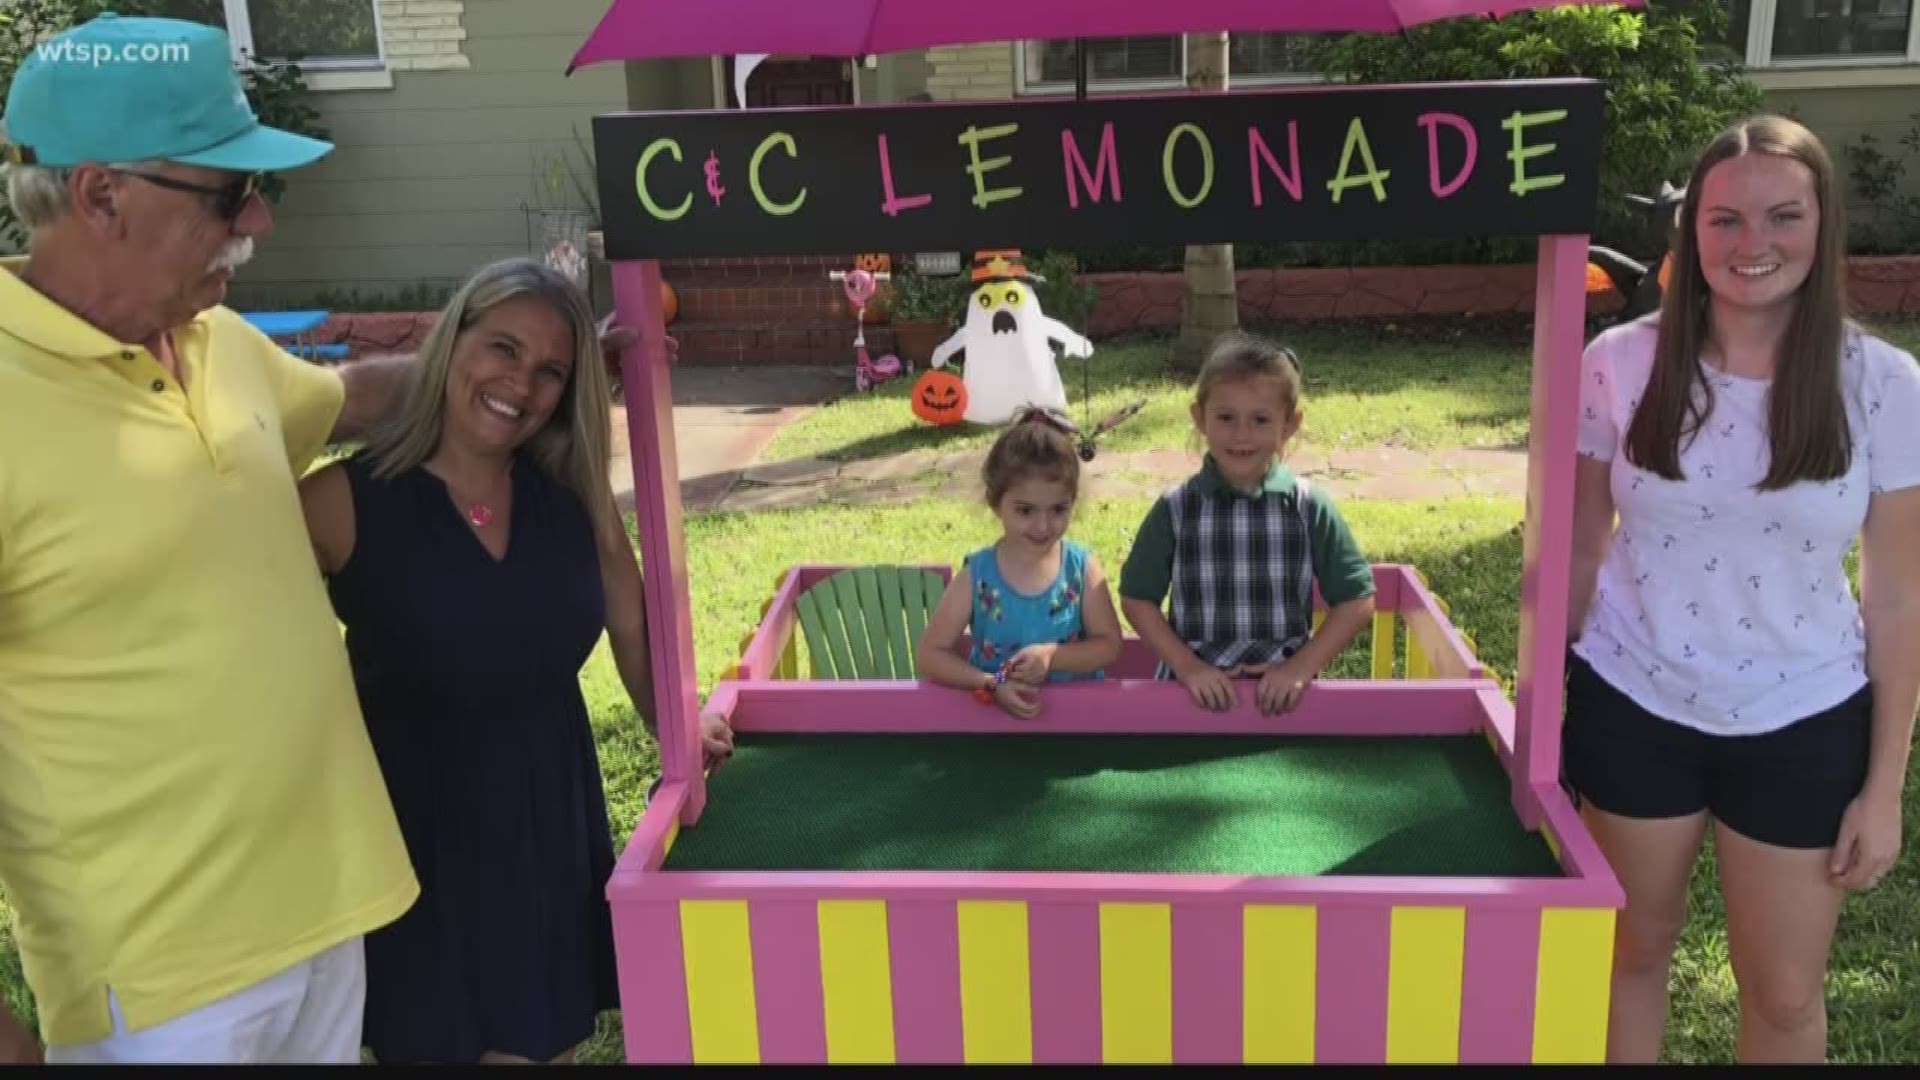 Michelle Fetz and John Schwier drove over an hour to deliver a pink and yellow lemonade stand to Caroline Gallagher.  https://bit.ly/2Bg9HU0